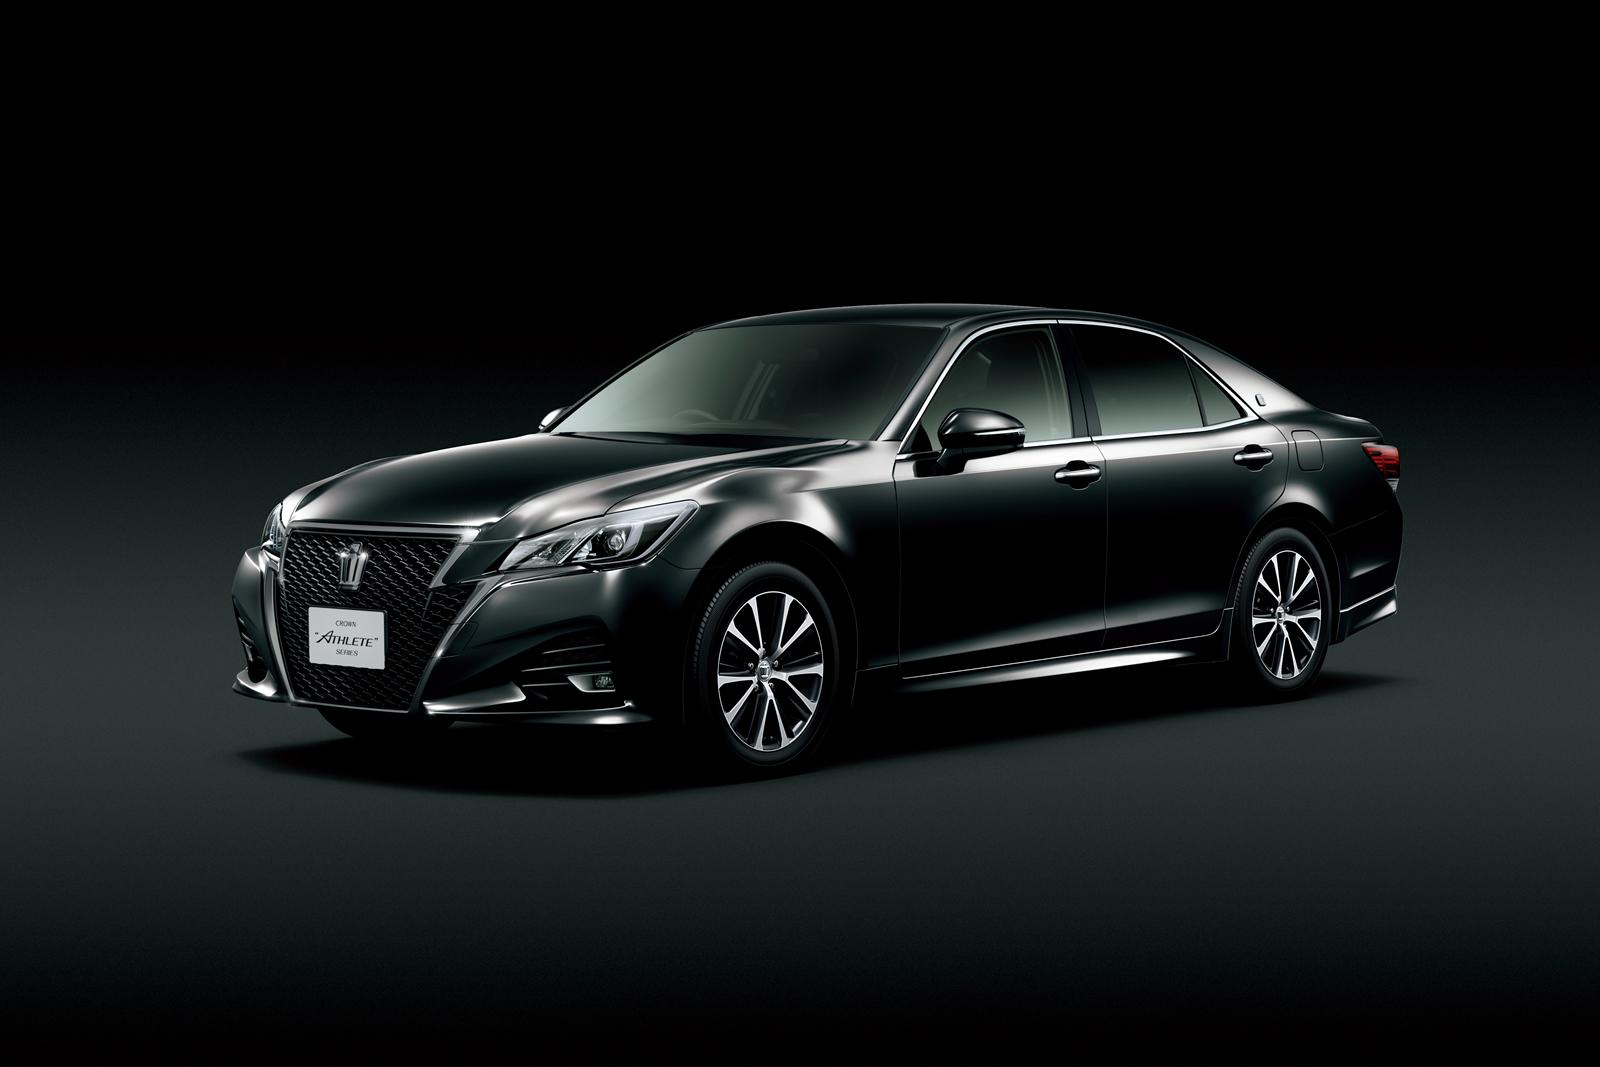 2014 Toyota Crown Athlete Is a Cool Sedan You Can't Have - autoevolution